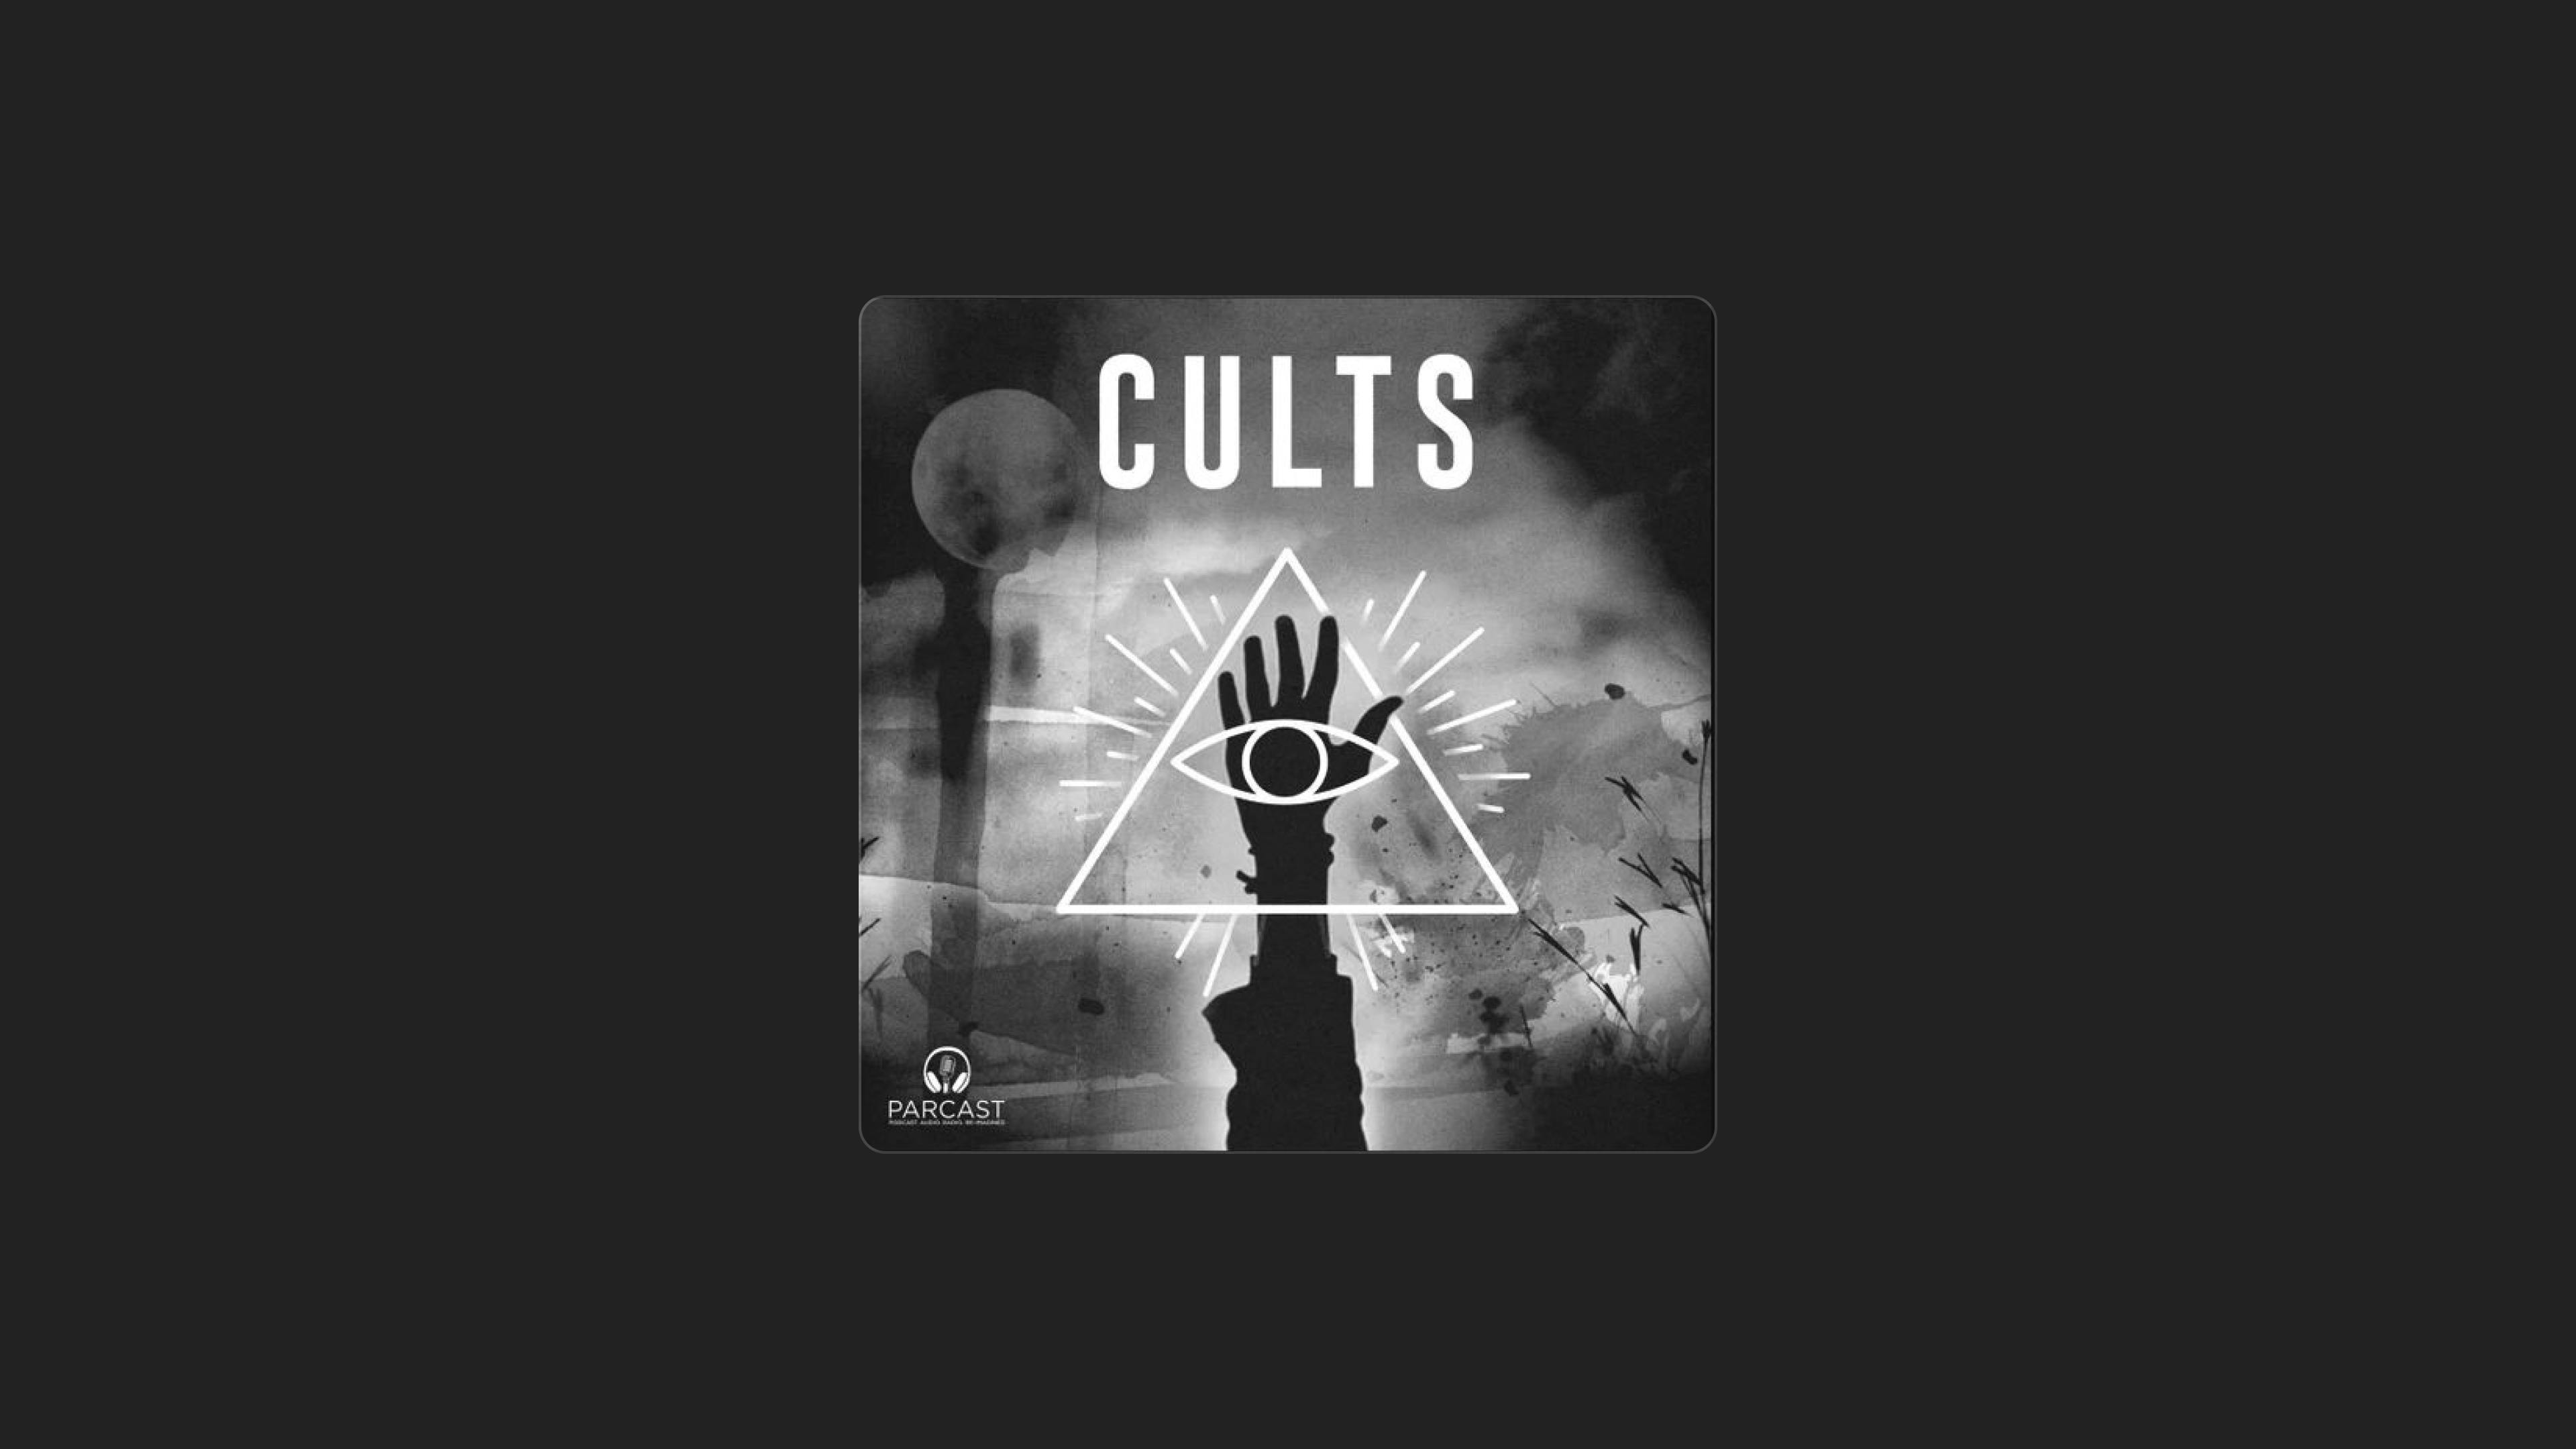 Top picks for podcasts about cults